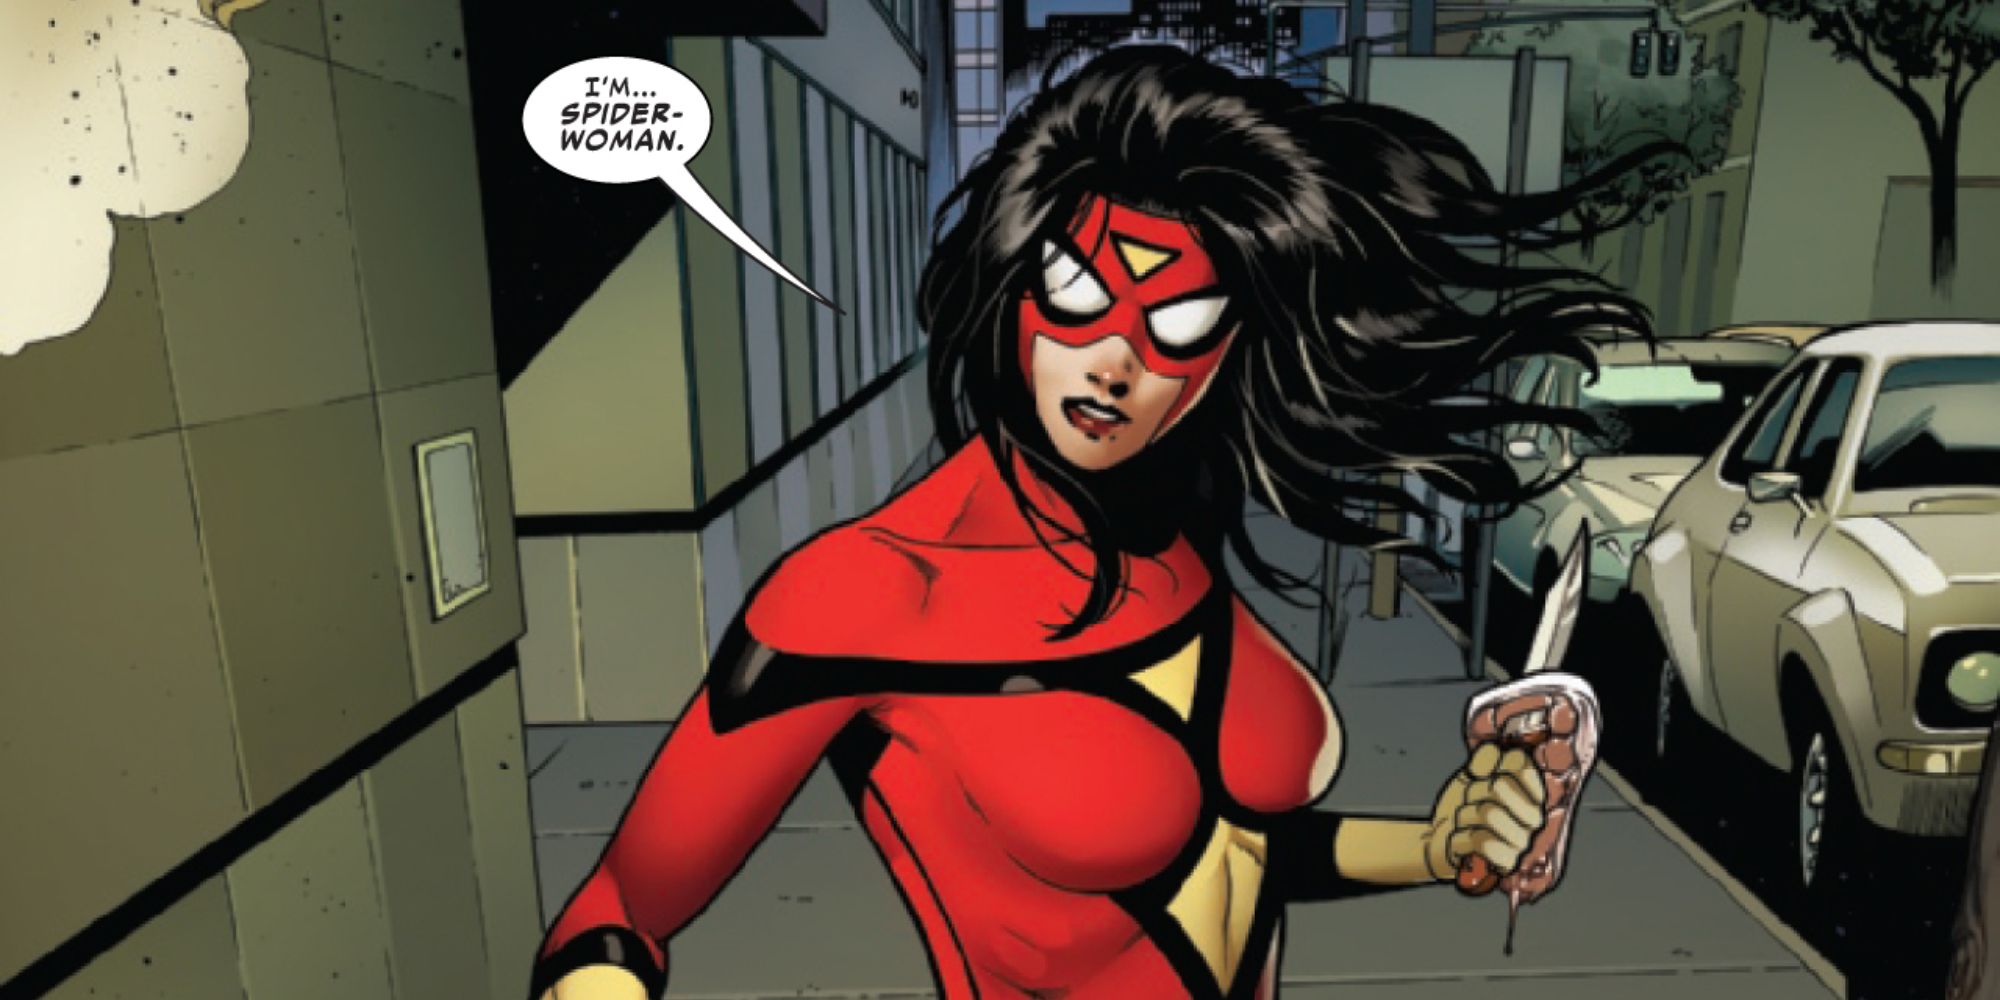 Jessica Drew holding a knife on the street